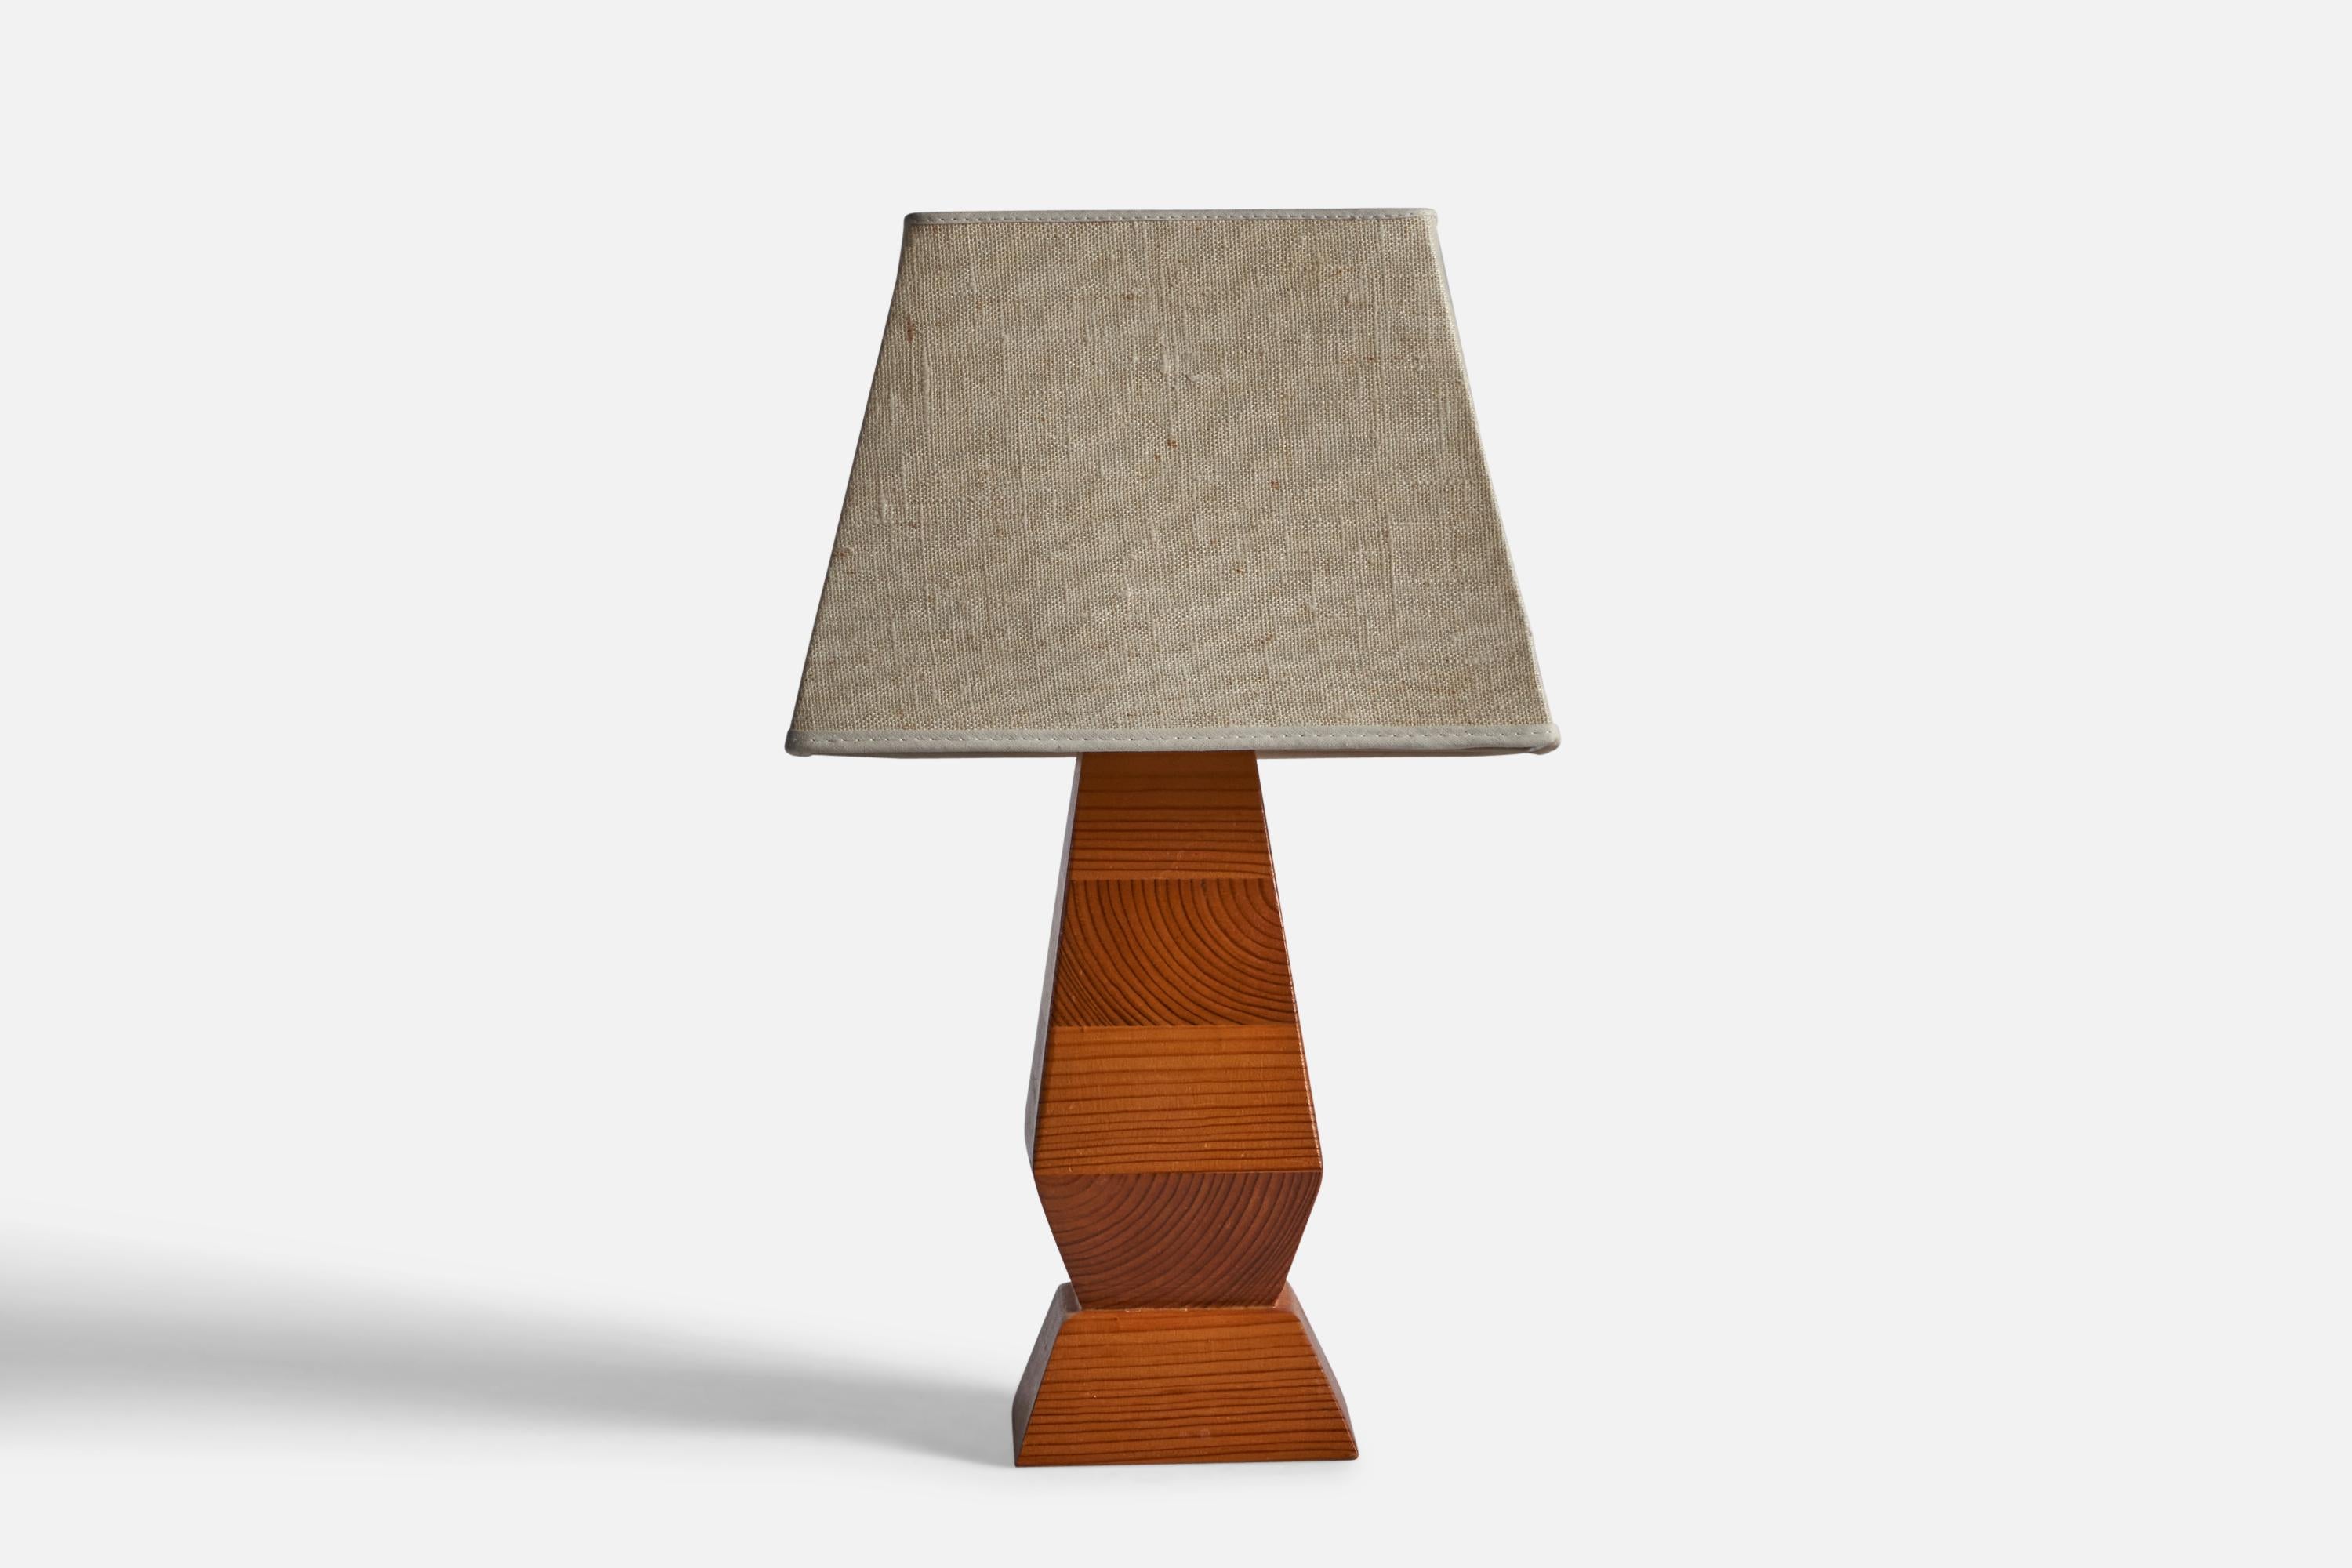 A stack-laminated pine and fabric table lamp, designed and produced in Sweden, c. 1970s.

Overall Dimensions: 15